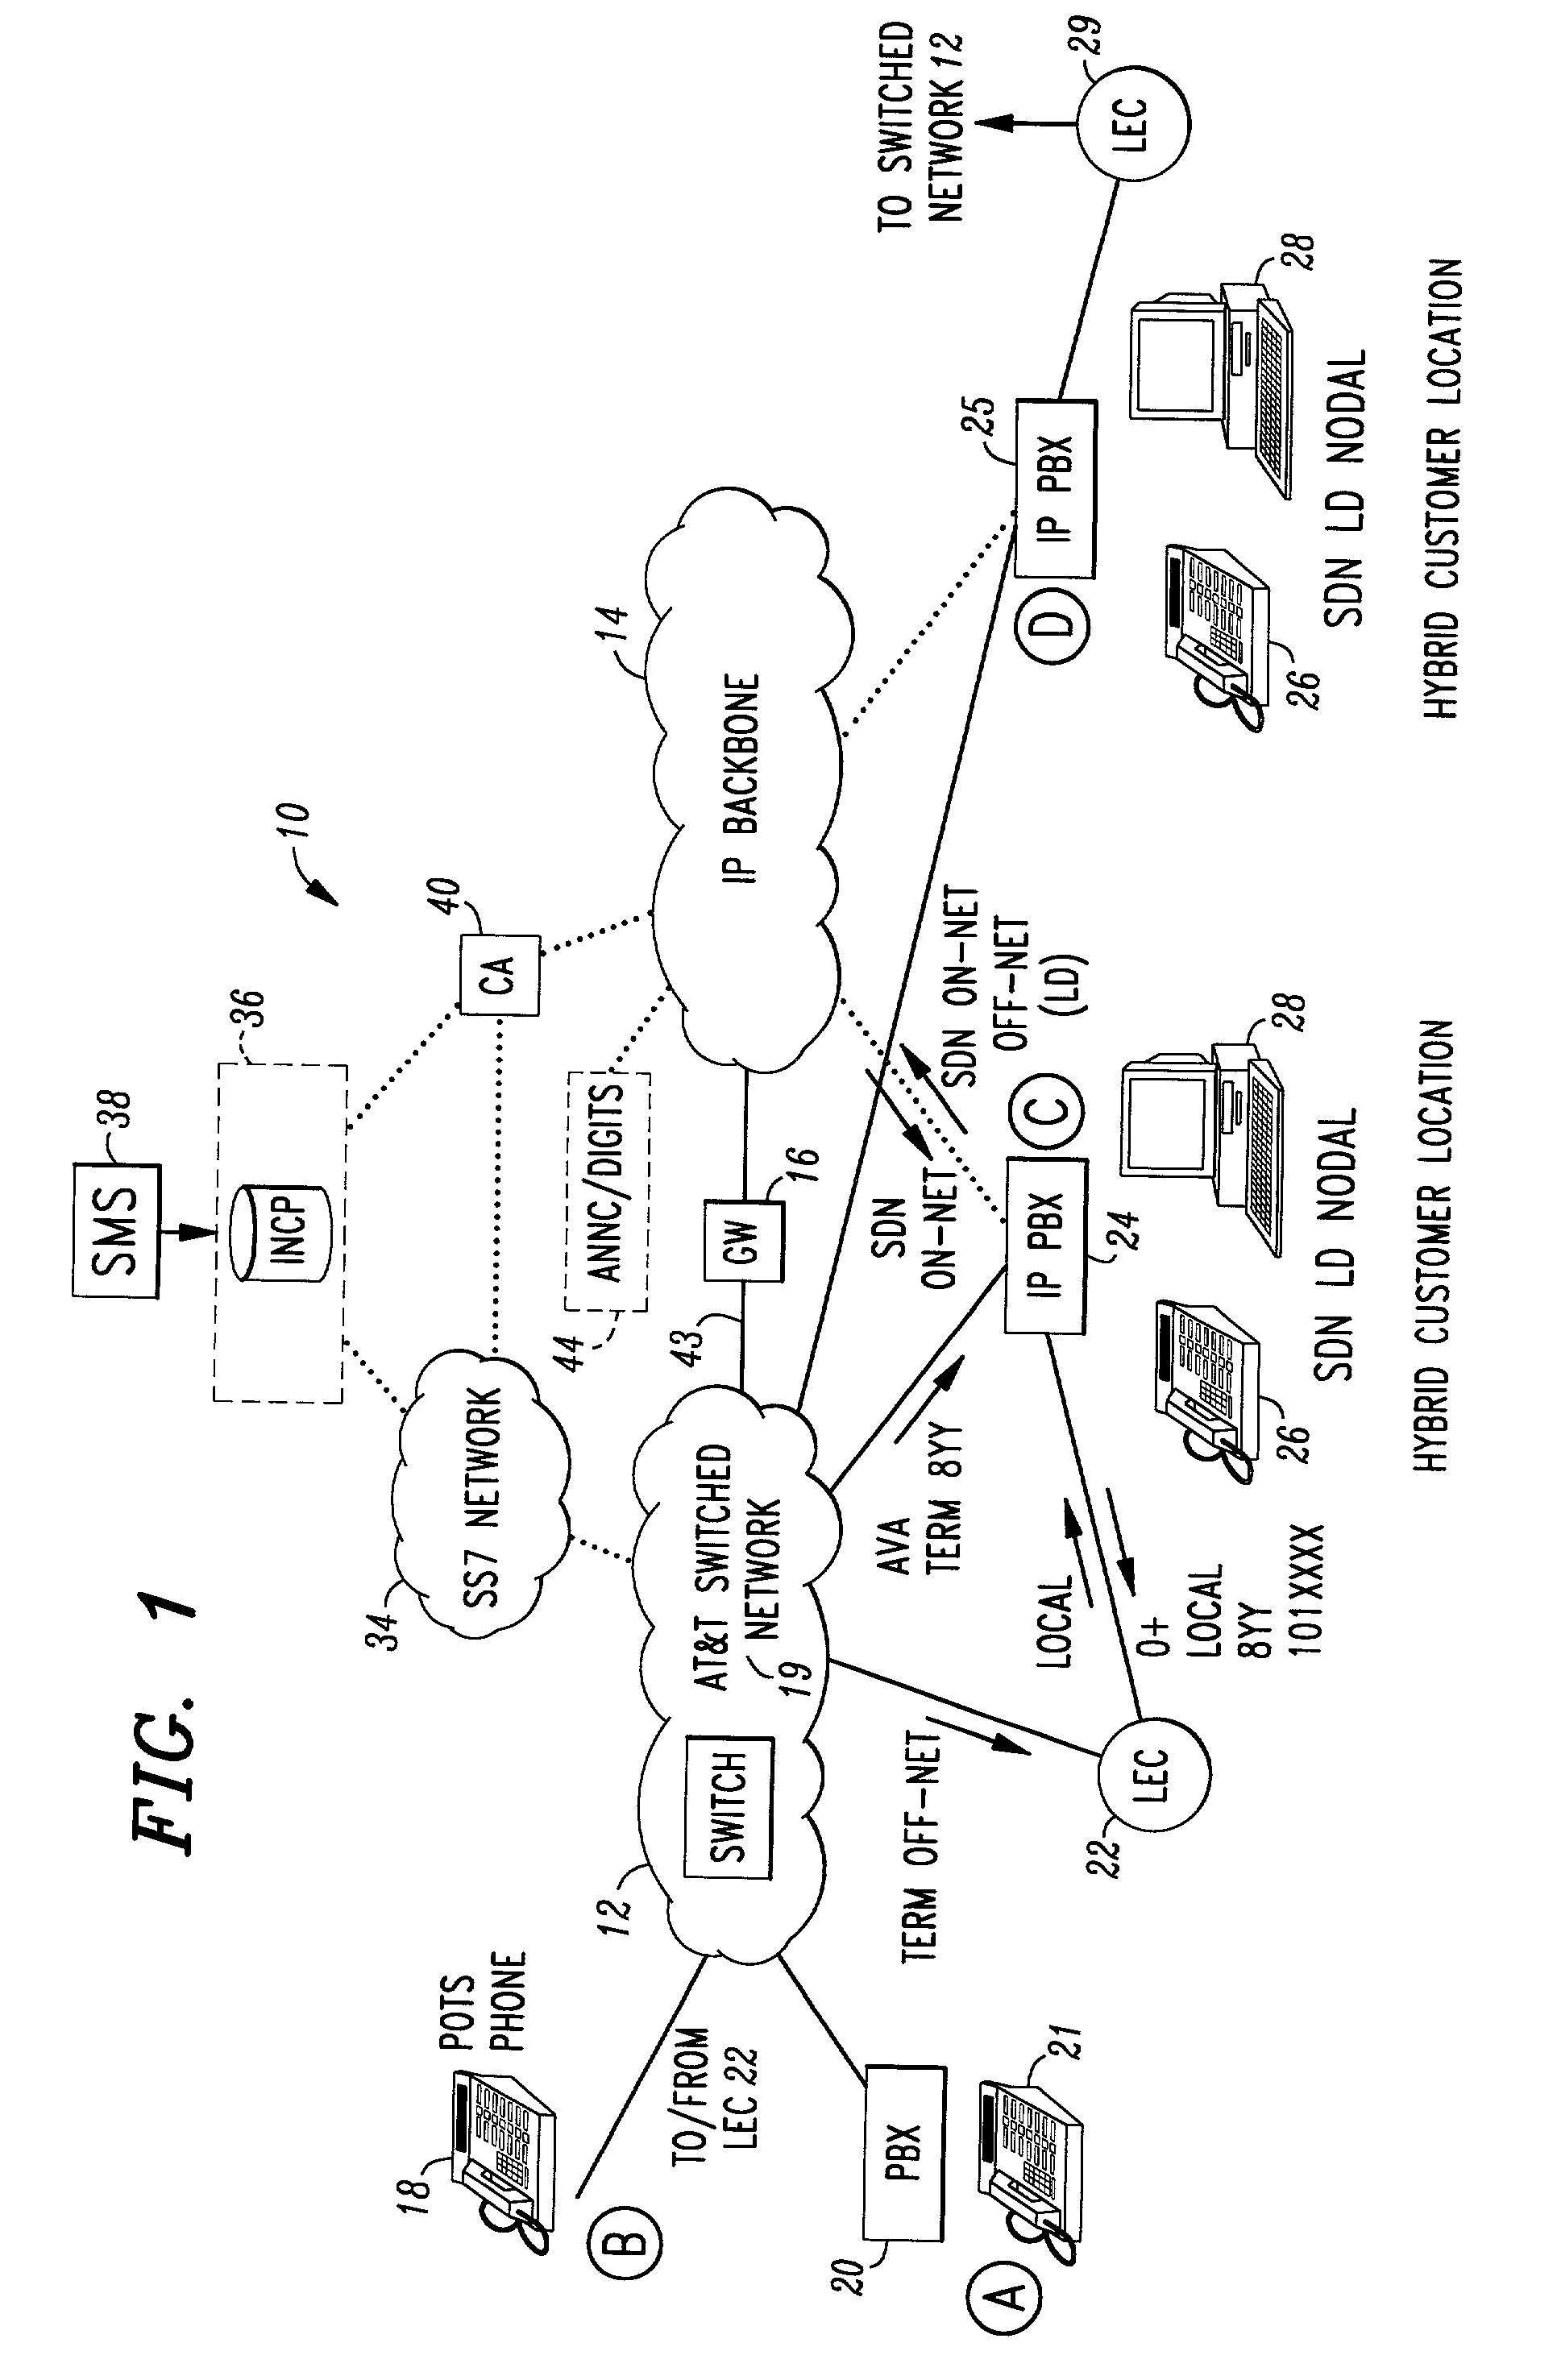 Technique for providing intelligent features for calls in a communications network independent of network architecture